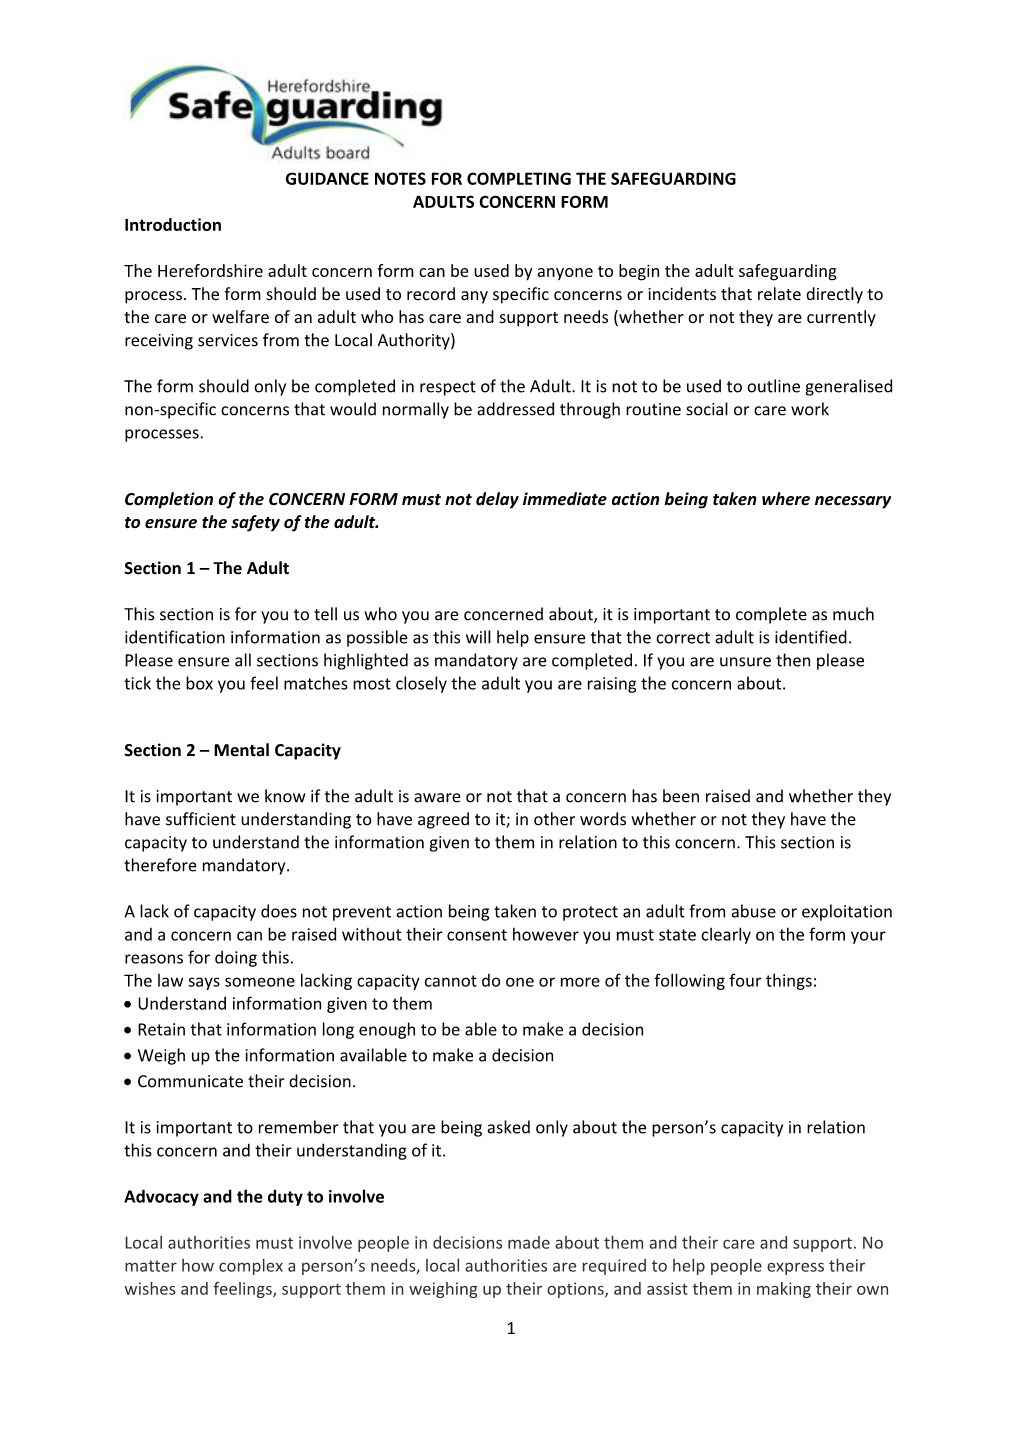 Guidance Notes for Completing the Safeguarding